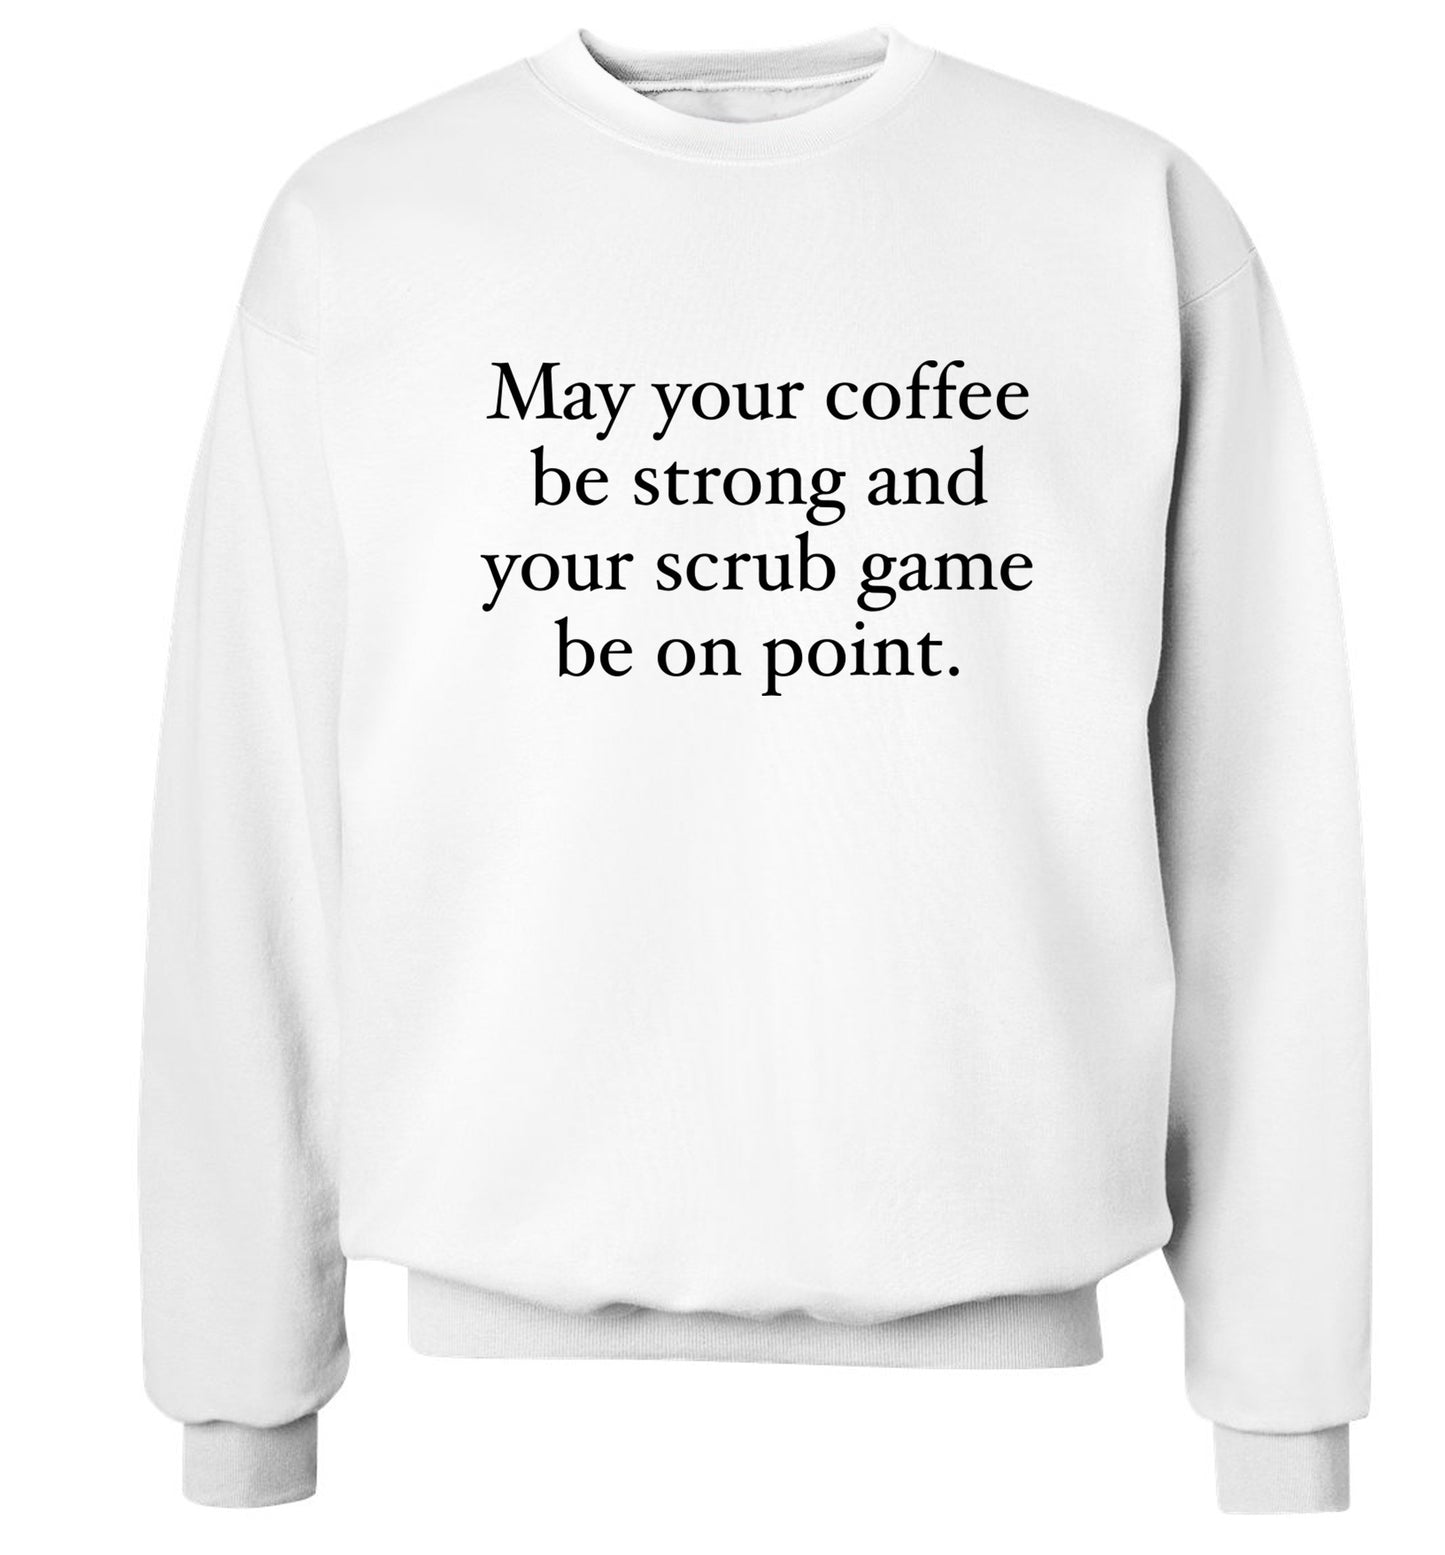 May your caffeine be strong and your scrub game be on point Adult's unisex white Sweater 2XL